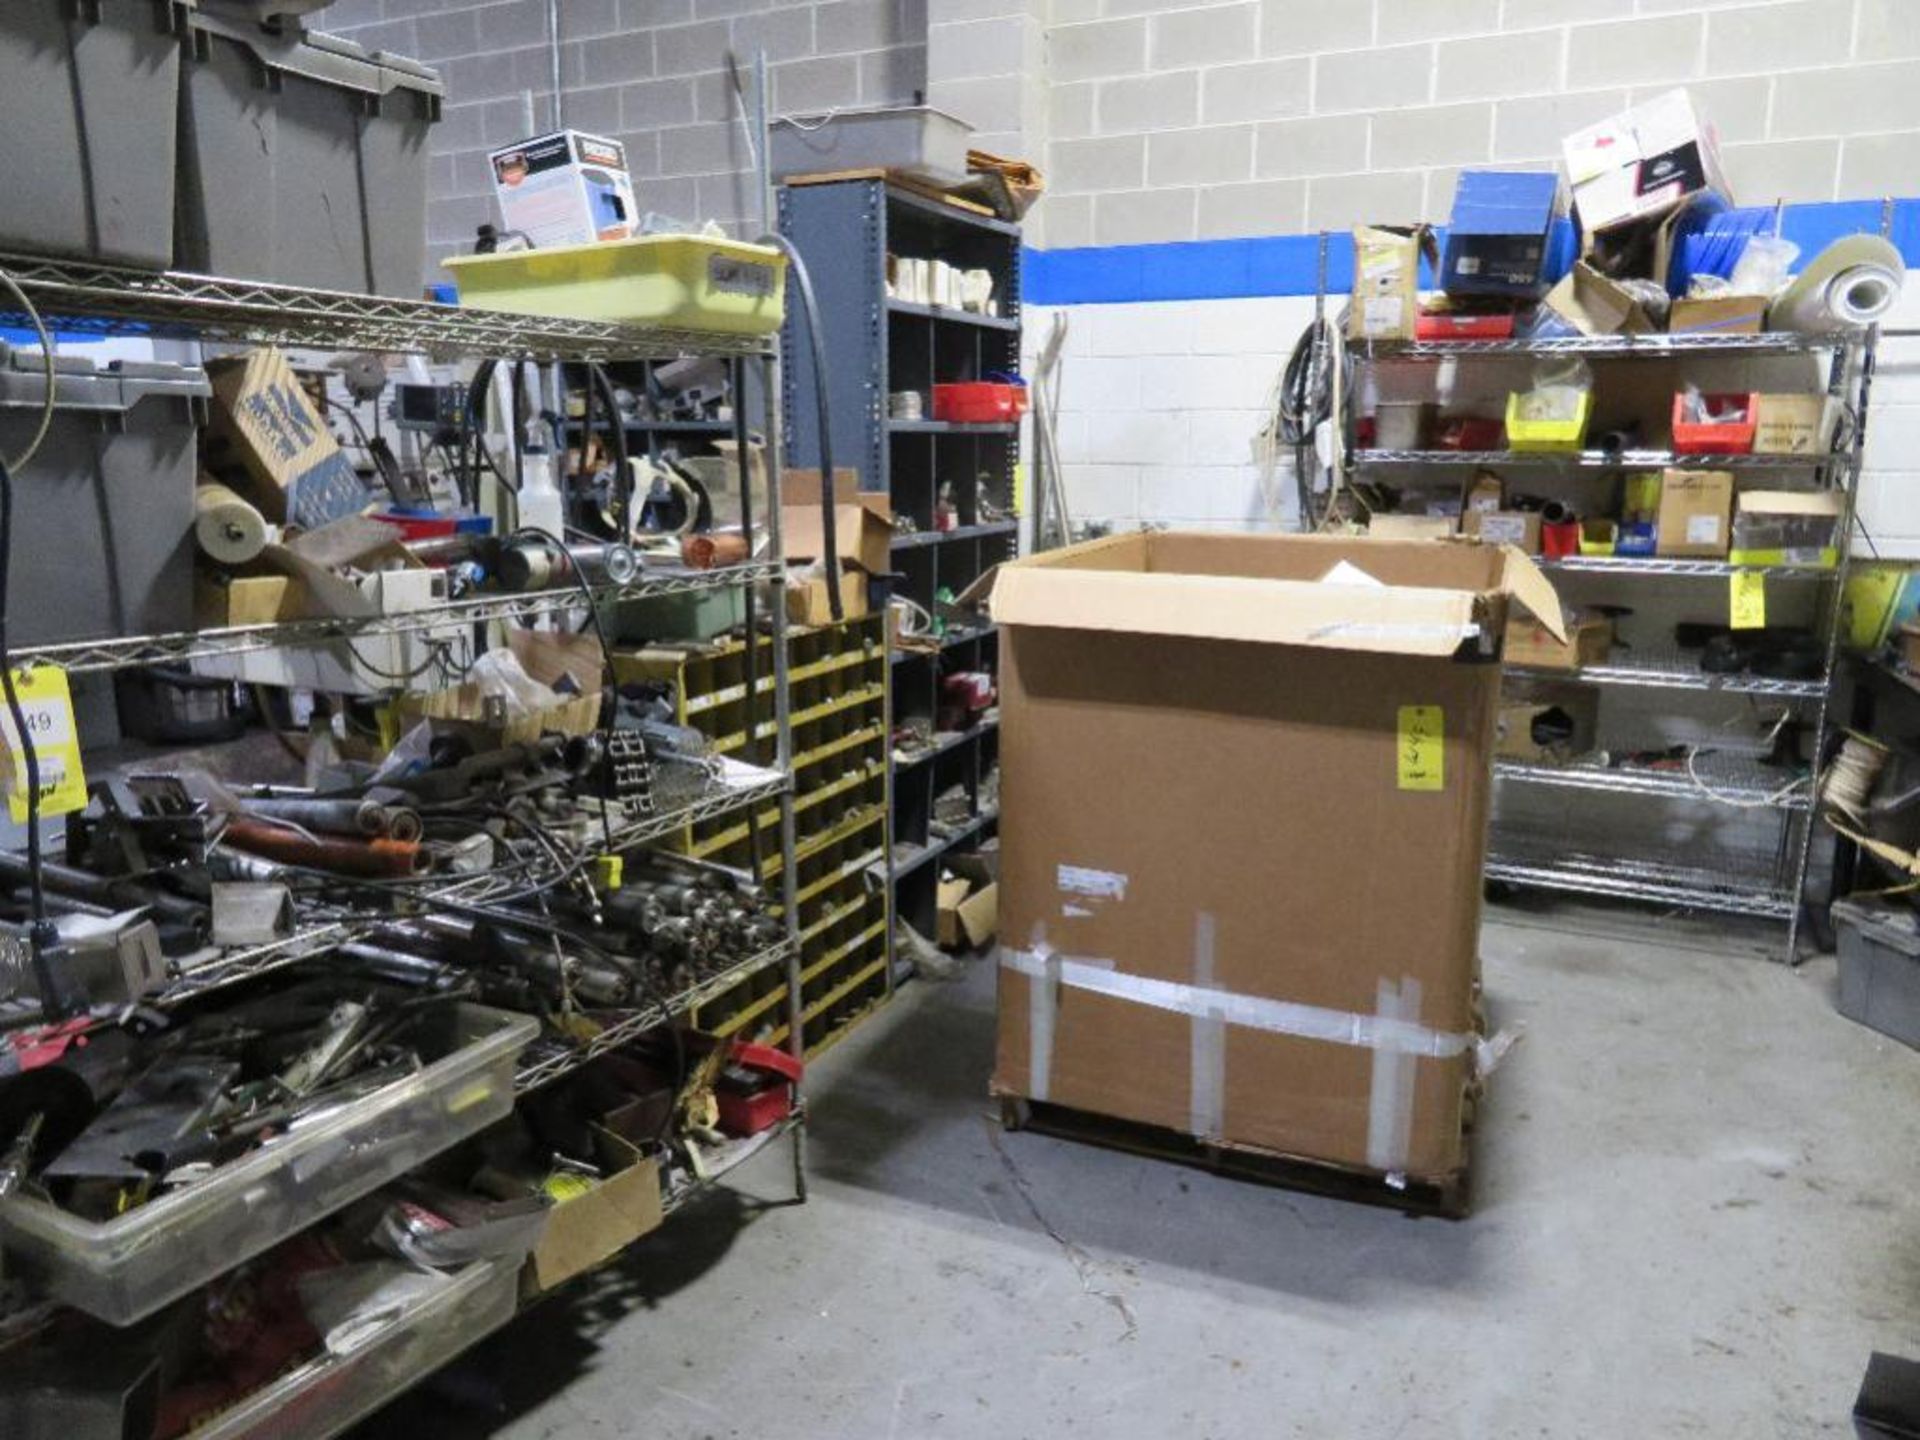 LOT: 48 in. x 96 in. Steel Table with Vise & Shelving Units with Contents of Conveyor Parts, Bearing - Image 2 of 3